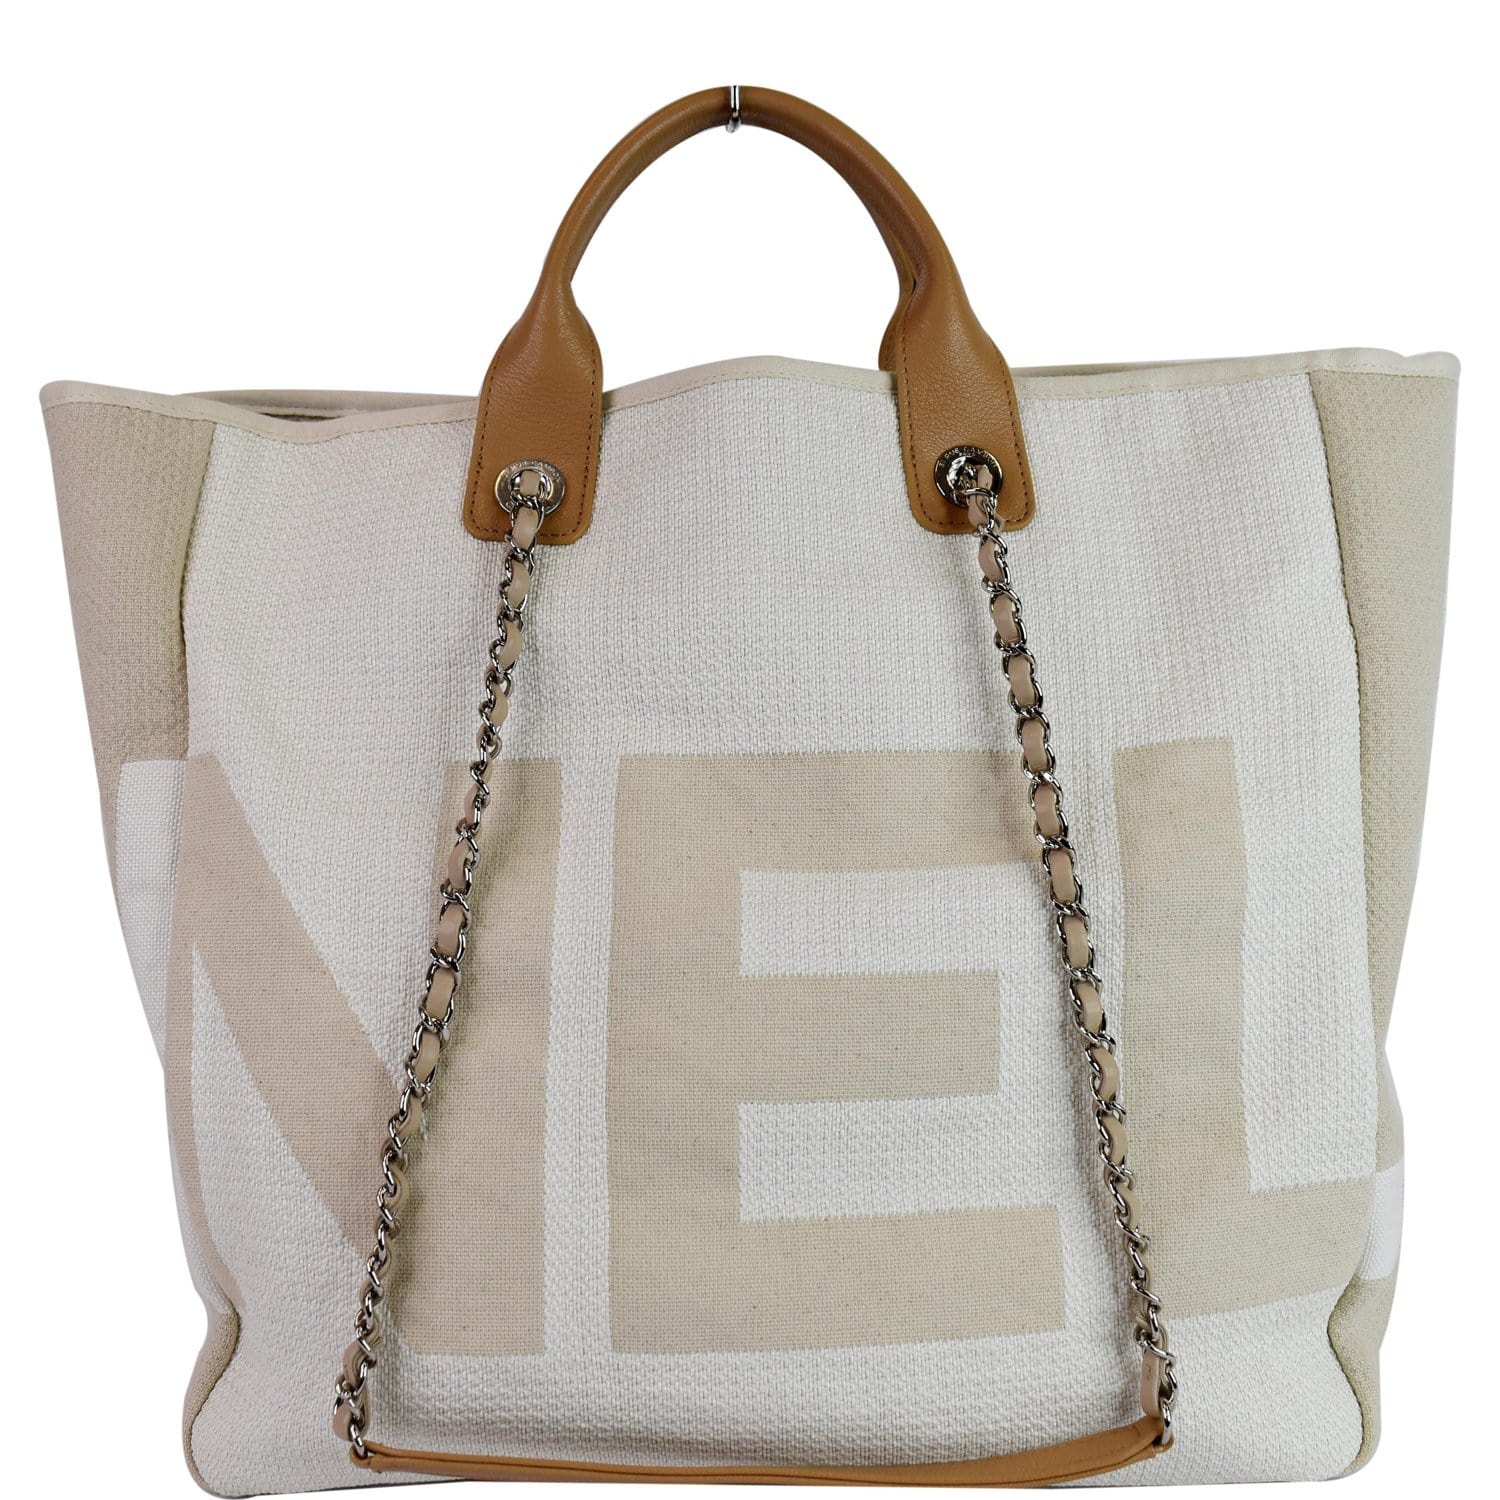 Chanel Beige Deauville Studded Small Tote Bag